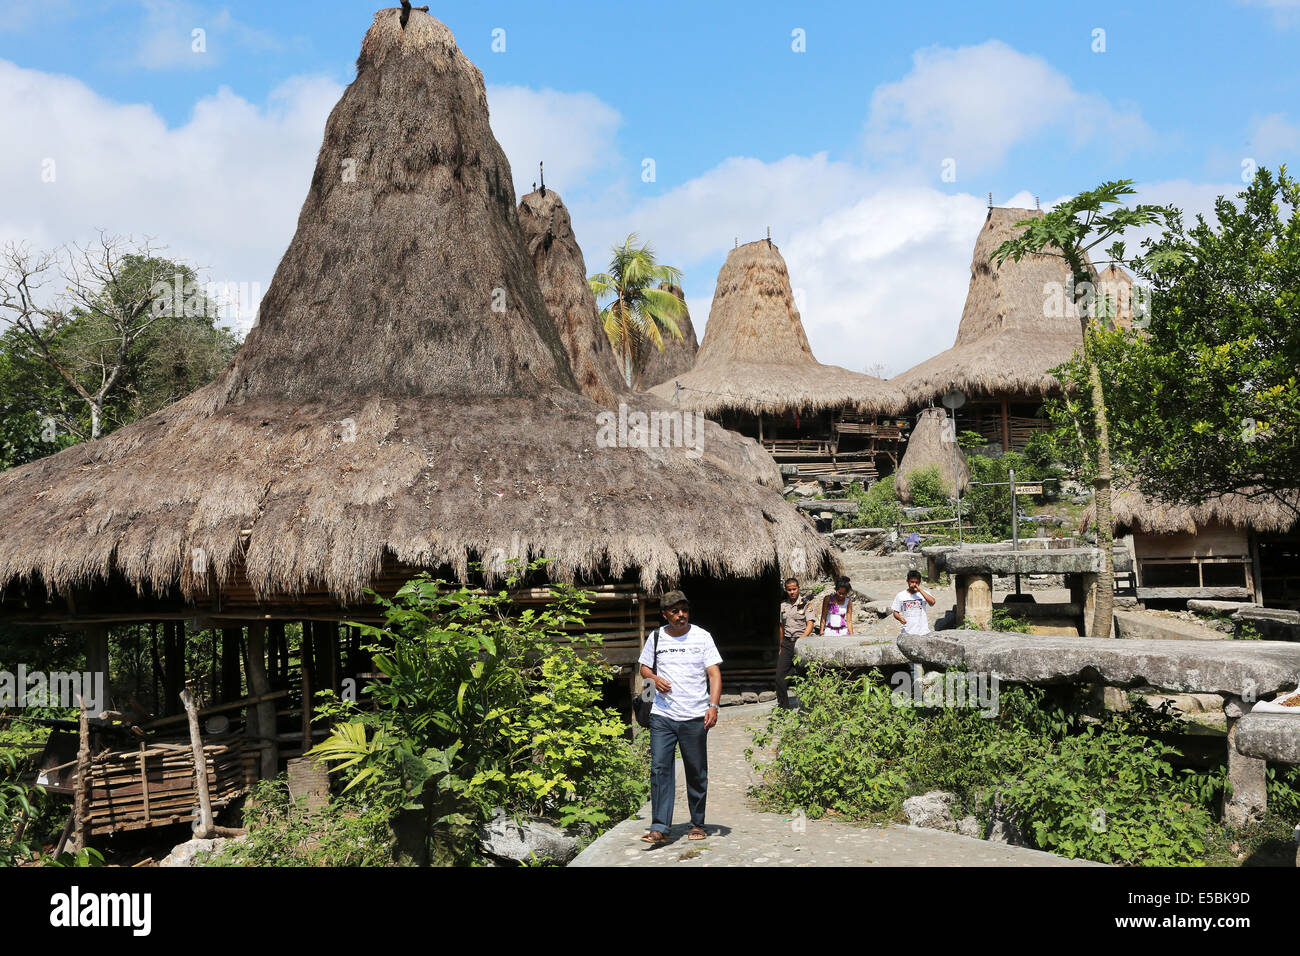 straw thatched houses of the traditional village Waitabar on the island of Sumba, Indonesia, Asia Stock Photo